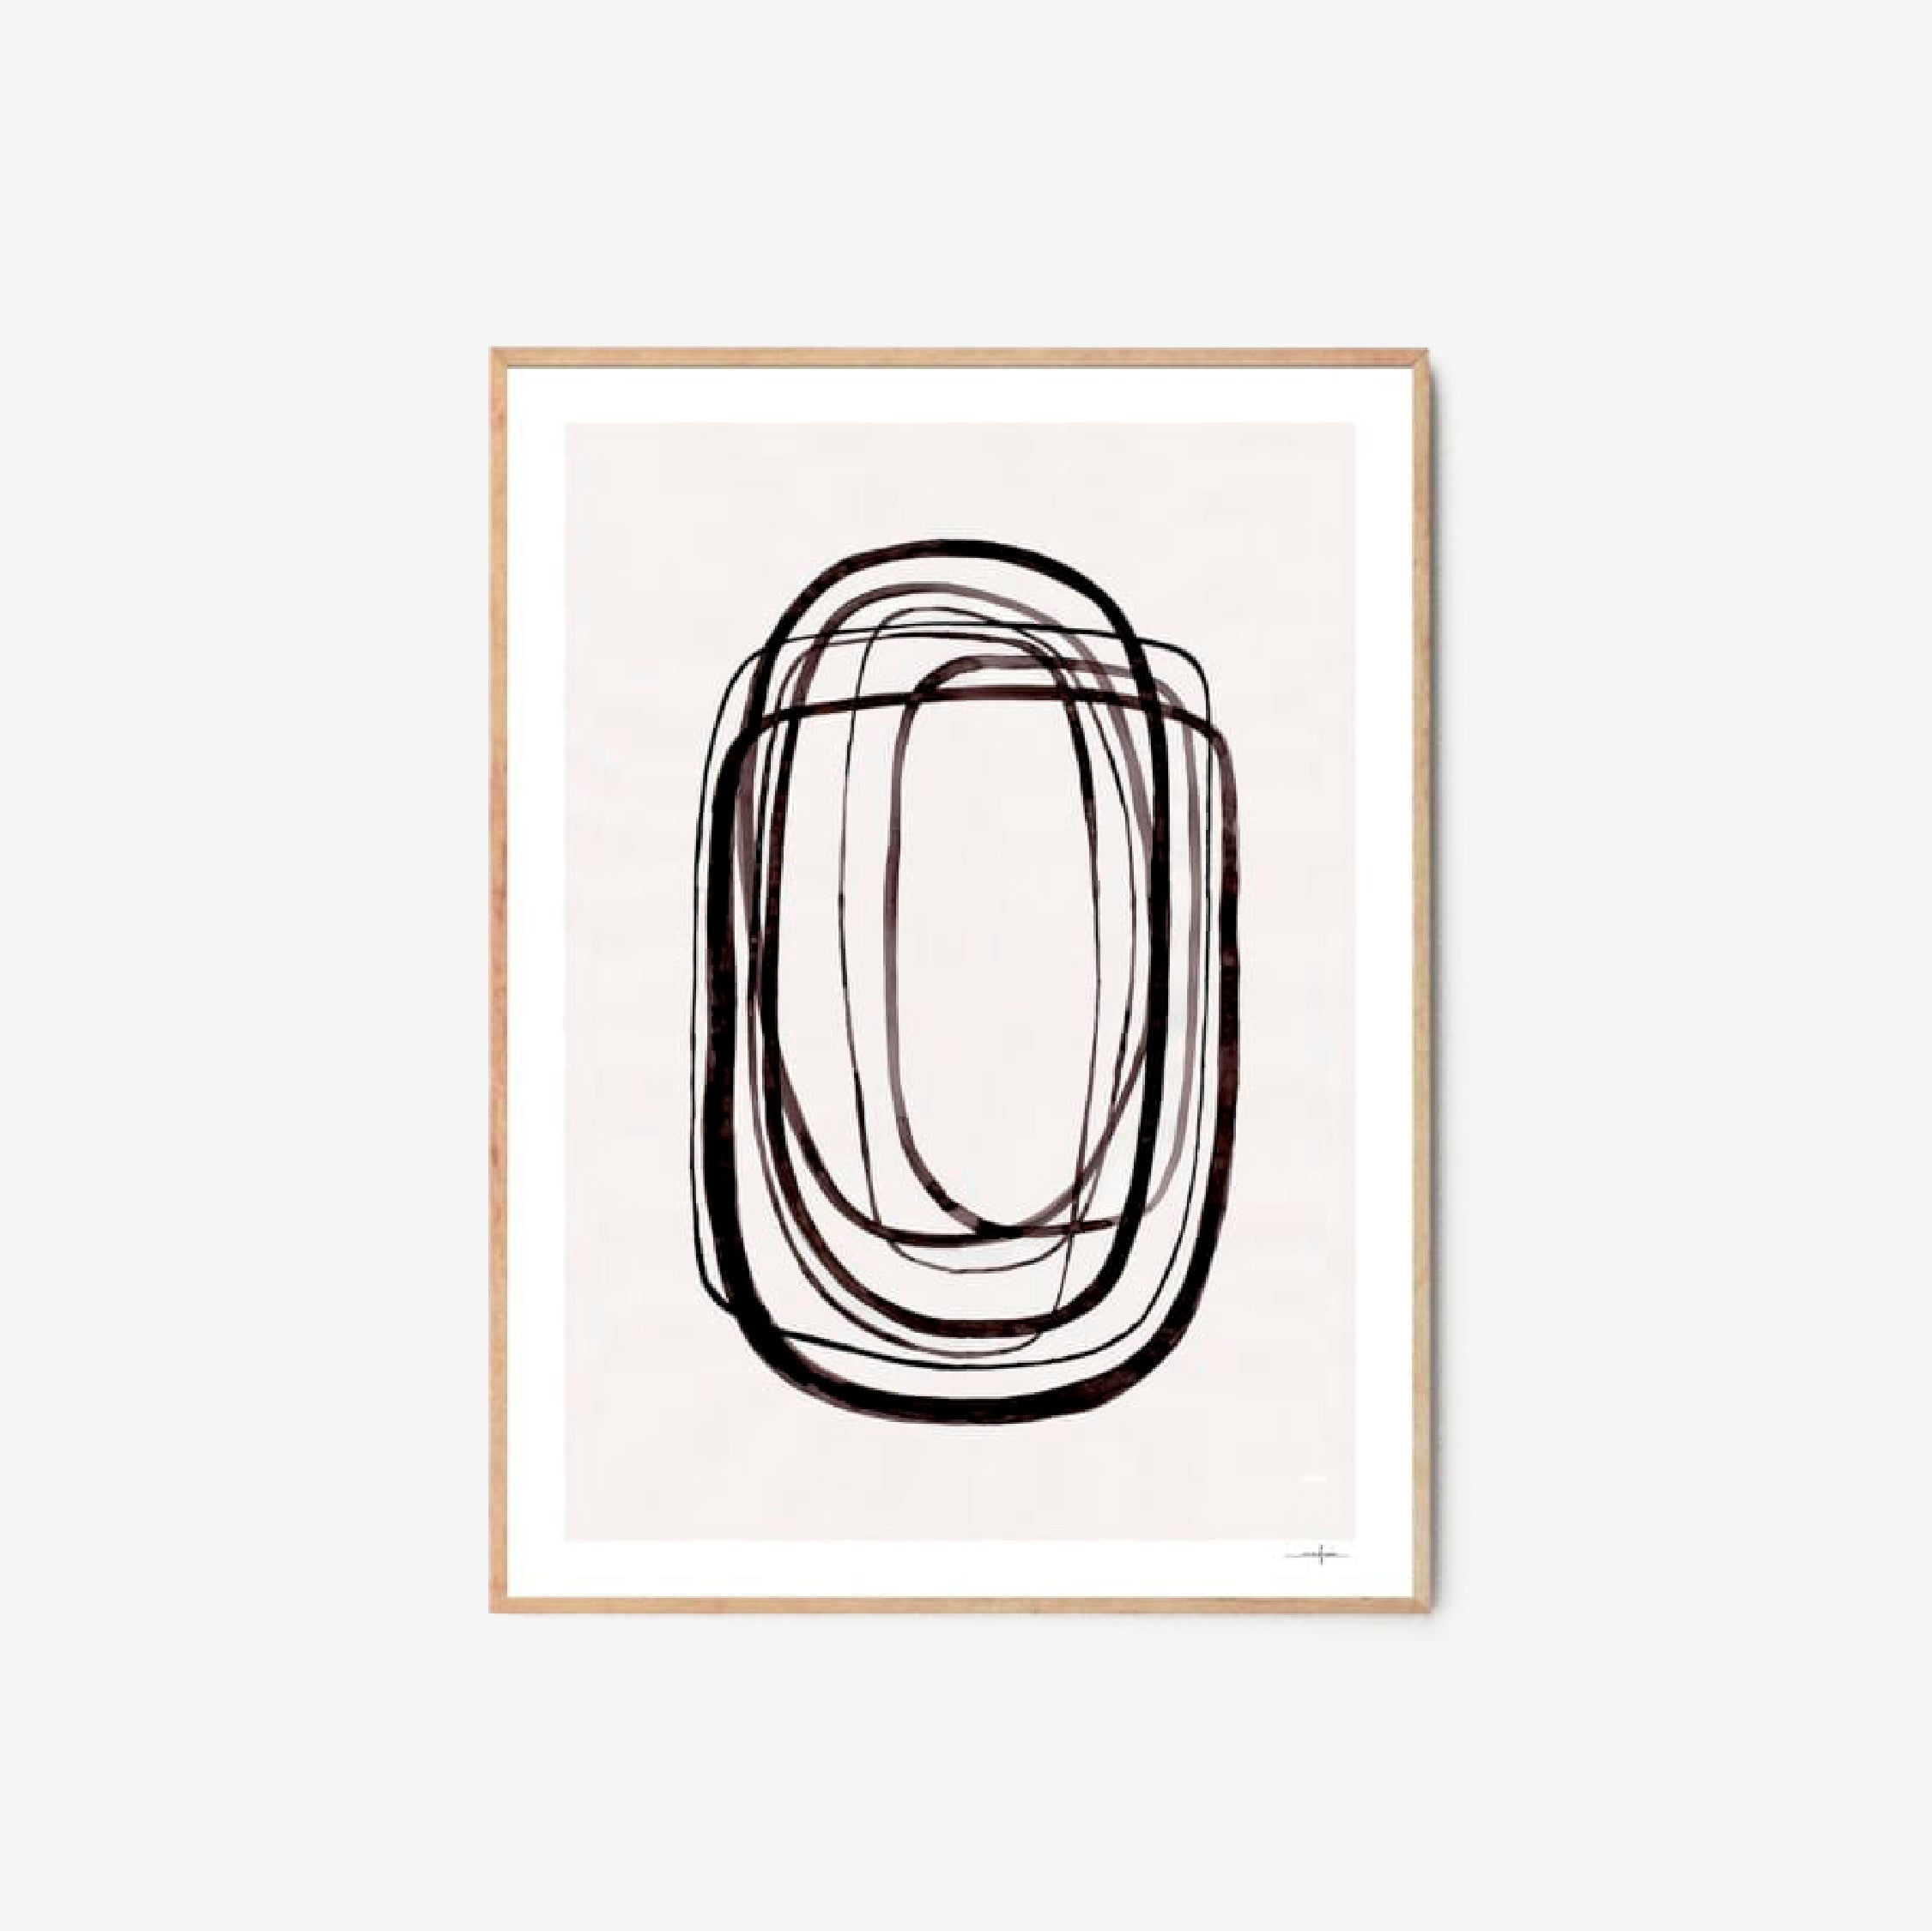 Ana Frois - Lines no. 03